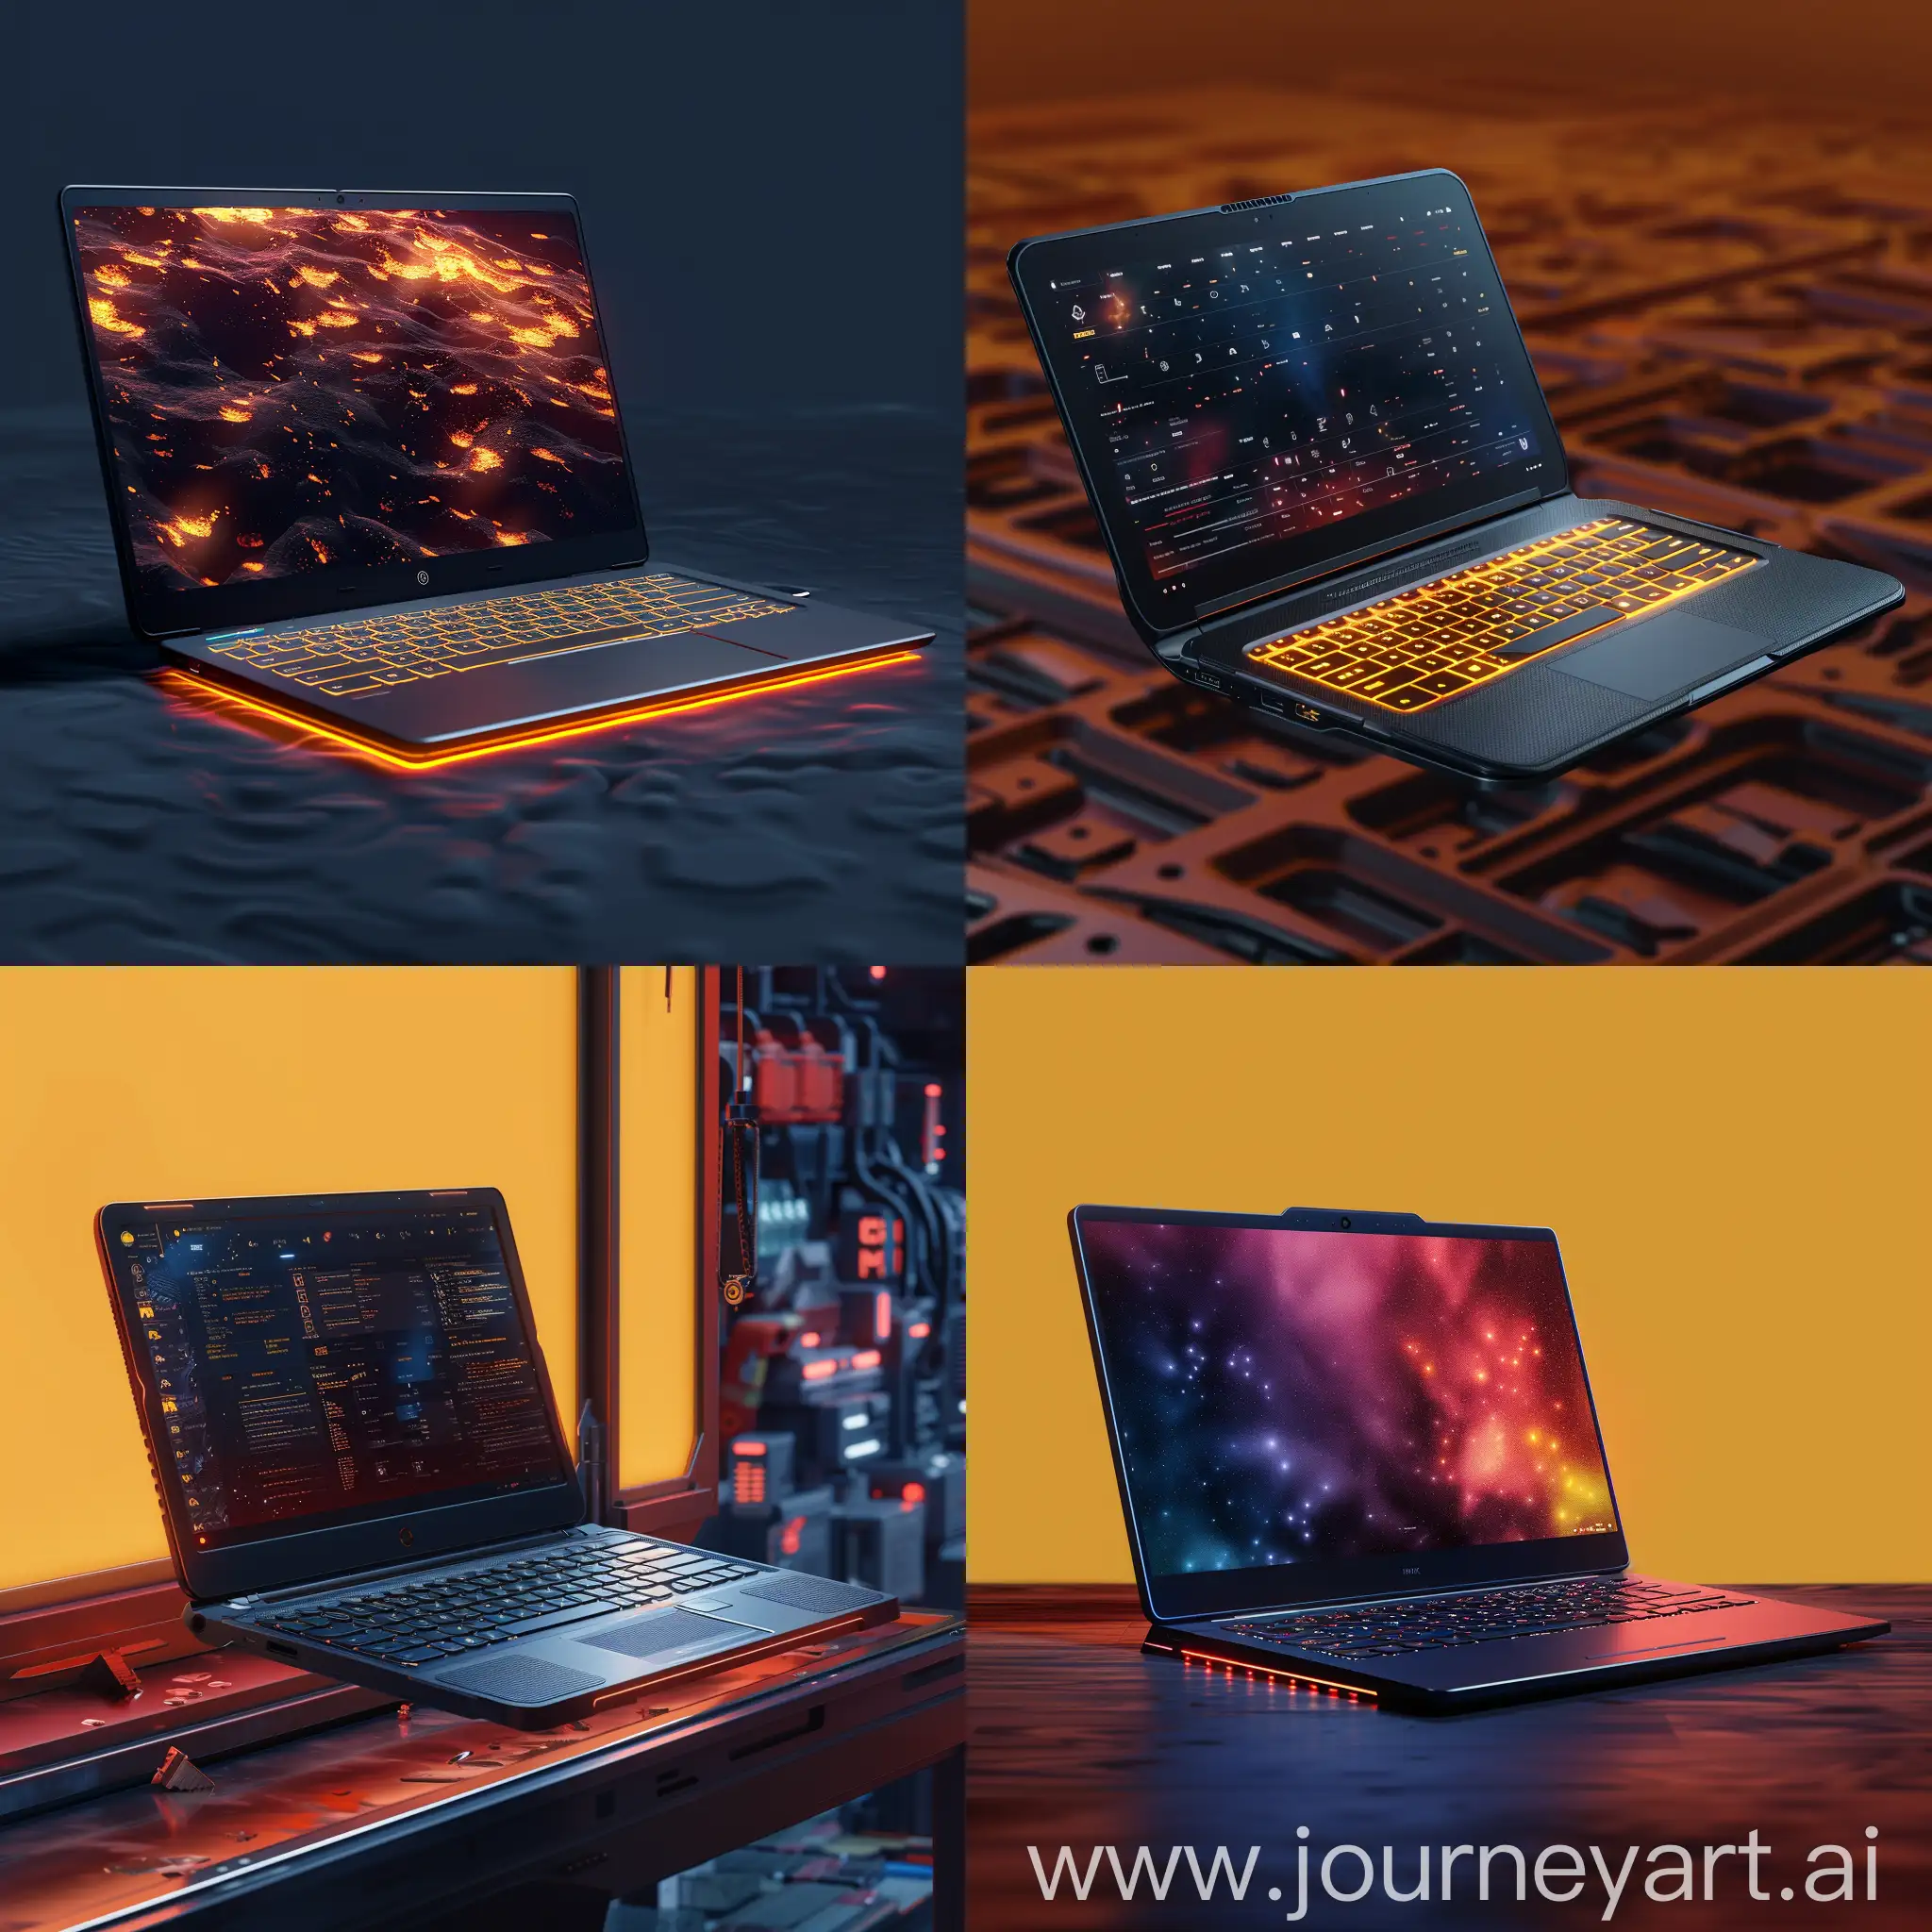 Futuristic:: laptop https://media.wired.com/photos/64daad6b4a854832b16fd3bc/master/pass/How-to-Choose-a-Laptop-August-2023-Gear.jpg, Holographic display, Transparent casing, Flexible and foldable design, Built-in AI assistant, Biometric security features, Augmented reality (AR) capabilities, Self-healing materials, Wireless charging, Voice and gesture controls, Modular design, Thin and lightweight design, Borderless display, High-resolution display, Backlit keyboard, Solid-state drive (SSD), USB-C ports, Touchscreen display, Long battery life, Multi-functional touchpad, Enhanced security features, Ruggedized chassis, Military-grade protection, Water and dust resistance, Reinforced hinges and corners, Gorilla Glass display, Sealed keyboard and touchpad, Shock-absorbing bumpers, Anti-glare and anti-reflection coating, Enhanced cooling system, Secure locking mechanisms, octane render --stylize 1000